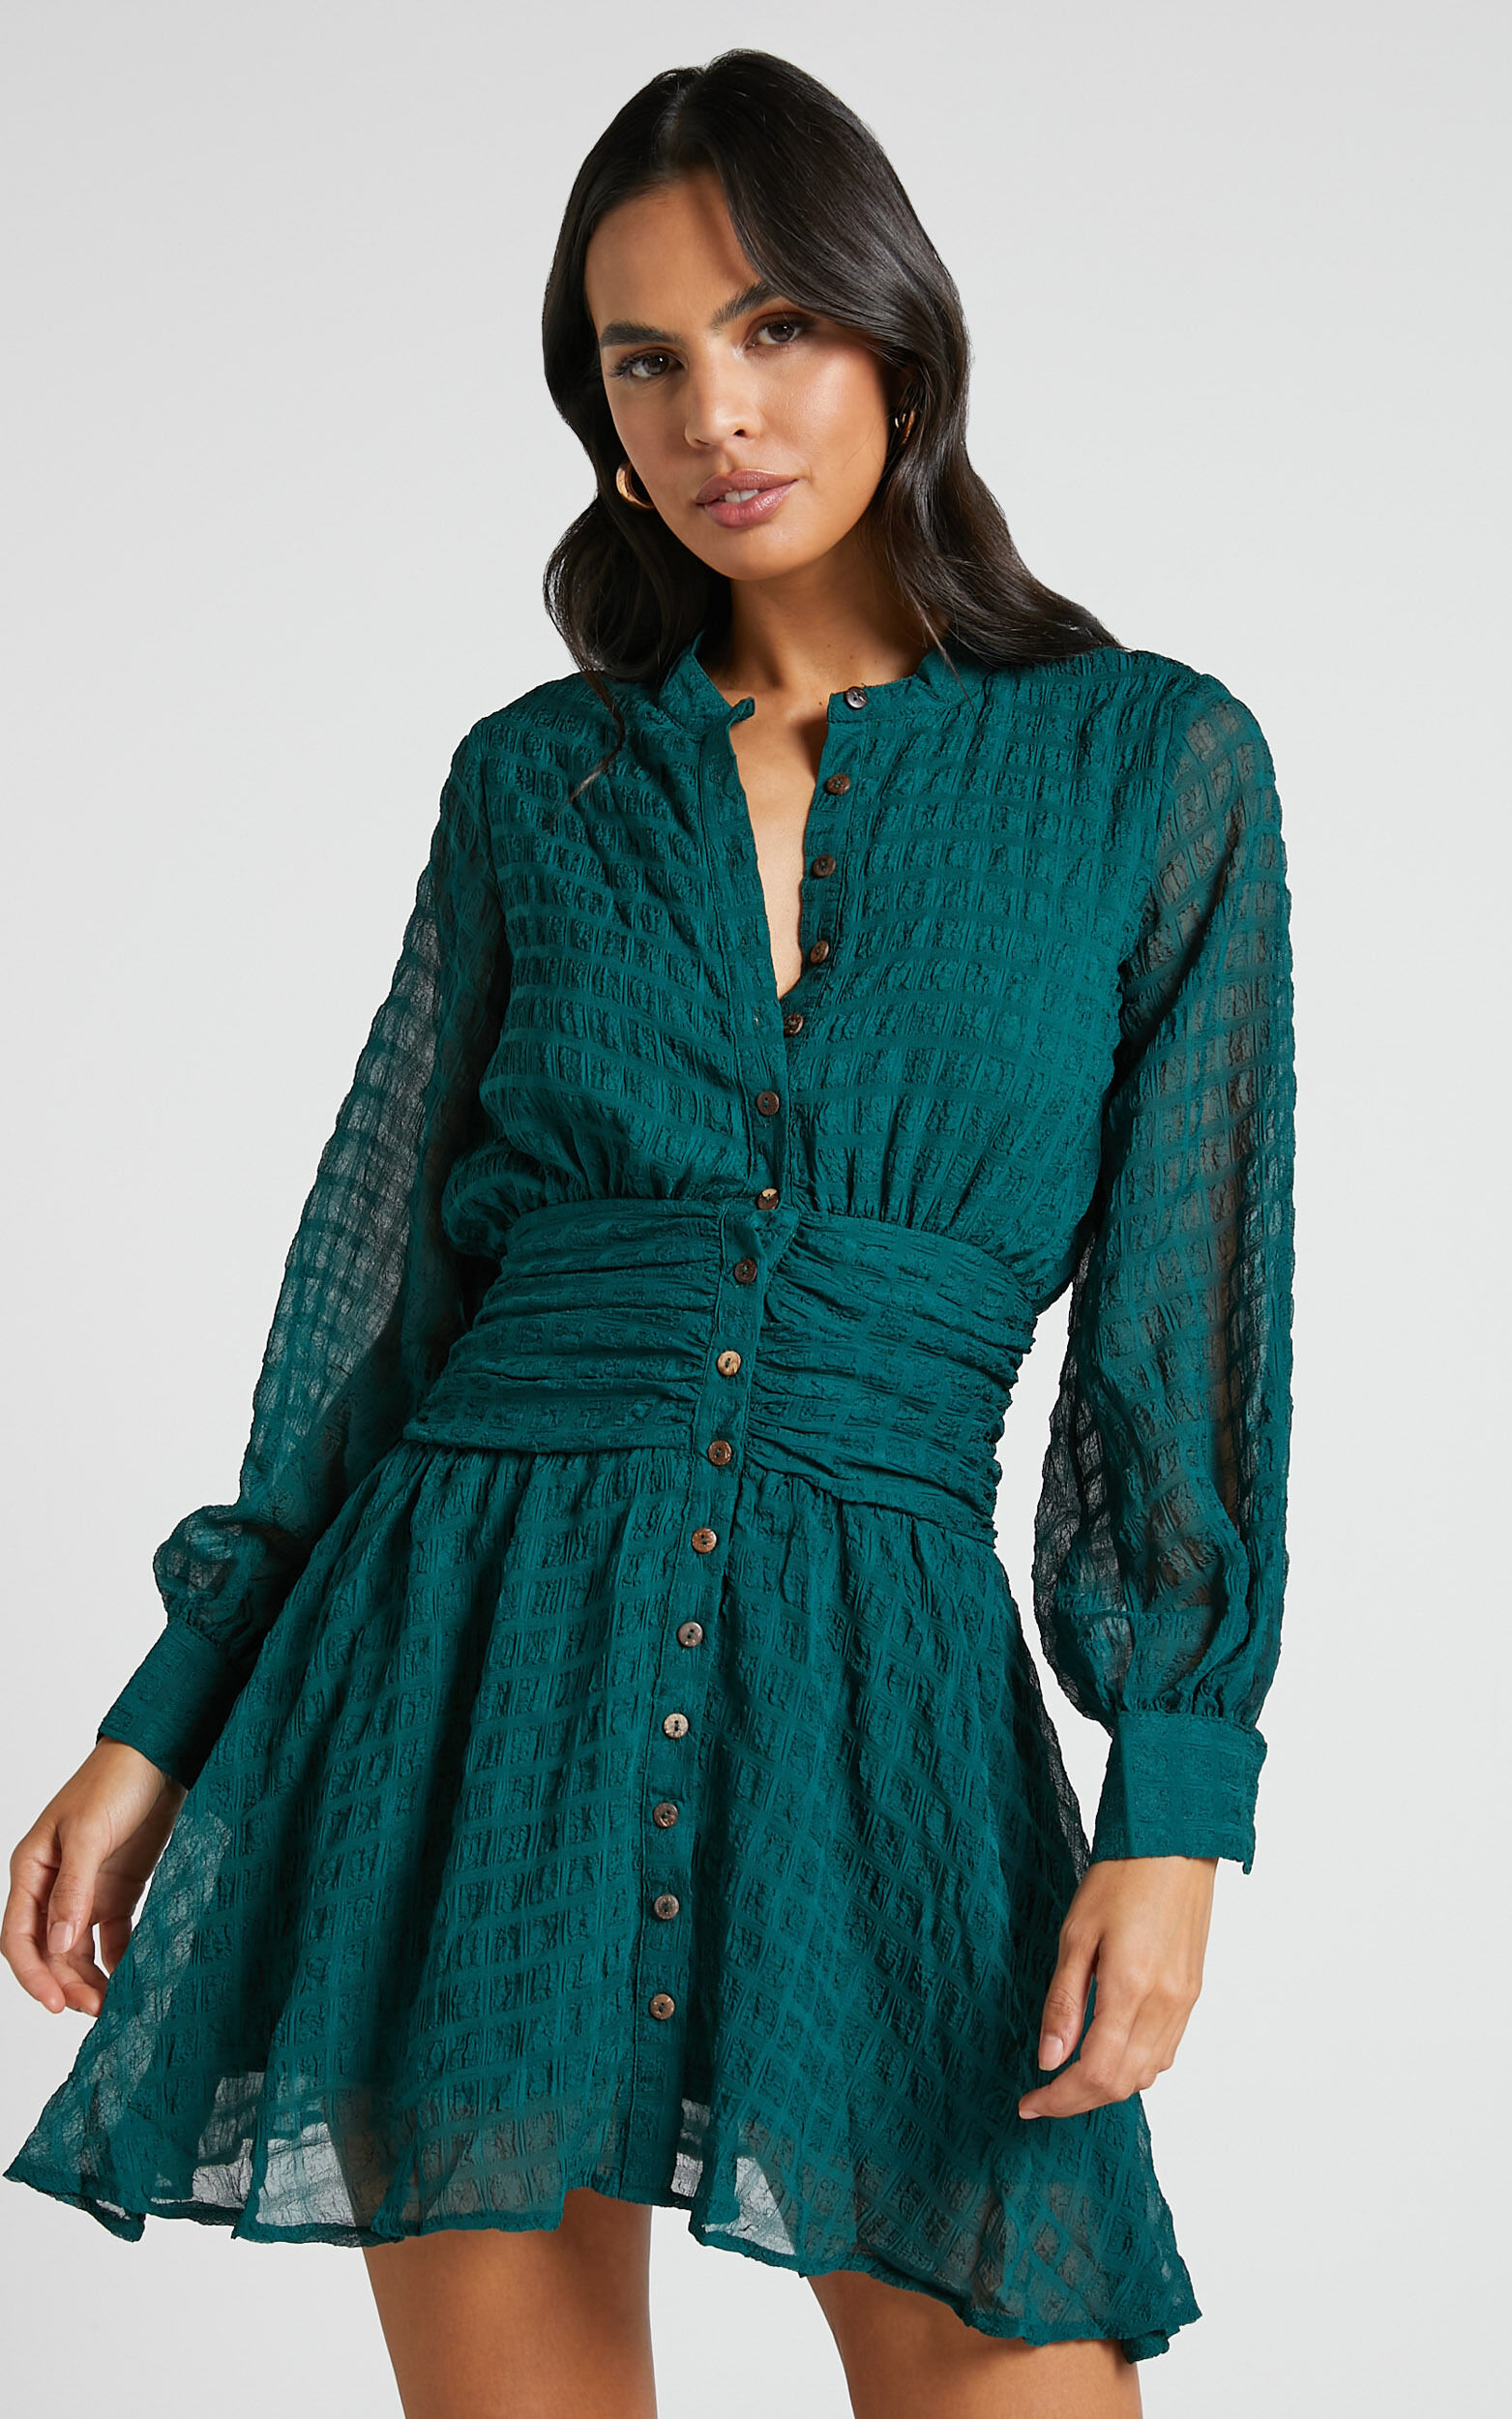 Pippie Mini Dress - Ruched Waist Long Sleeve Textured Dress in Emerald - 06, GRN1